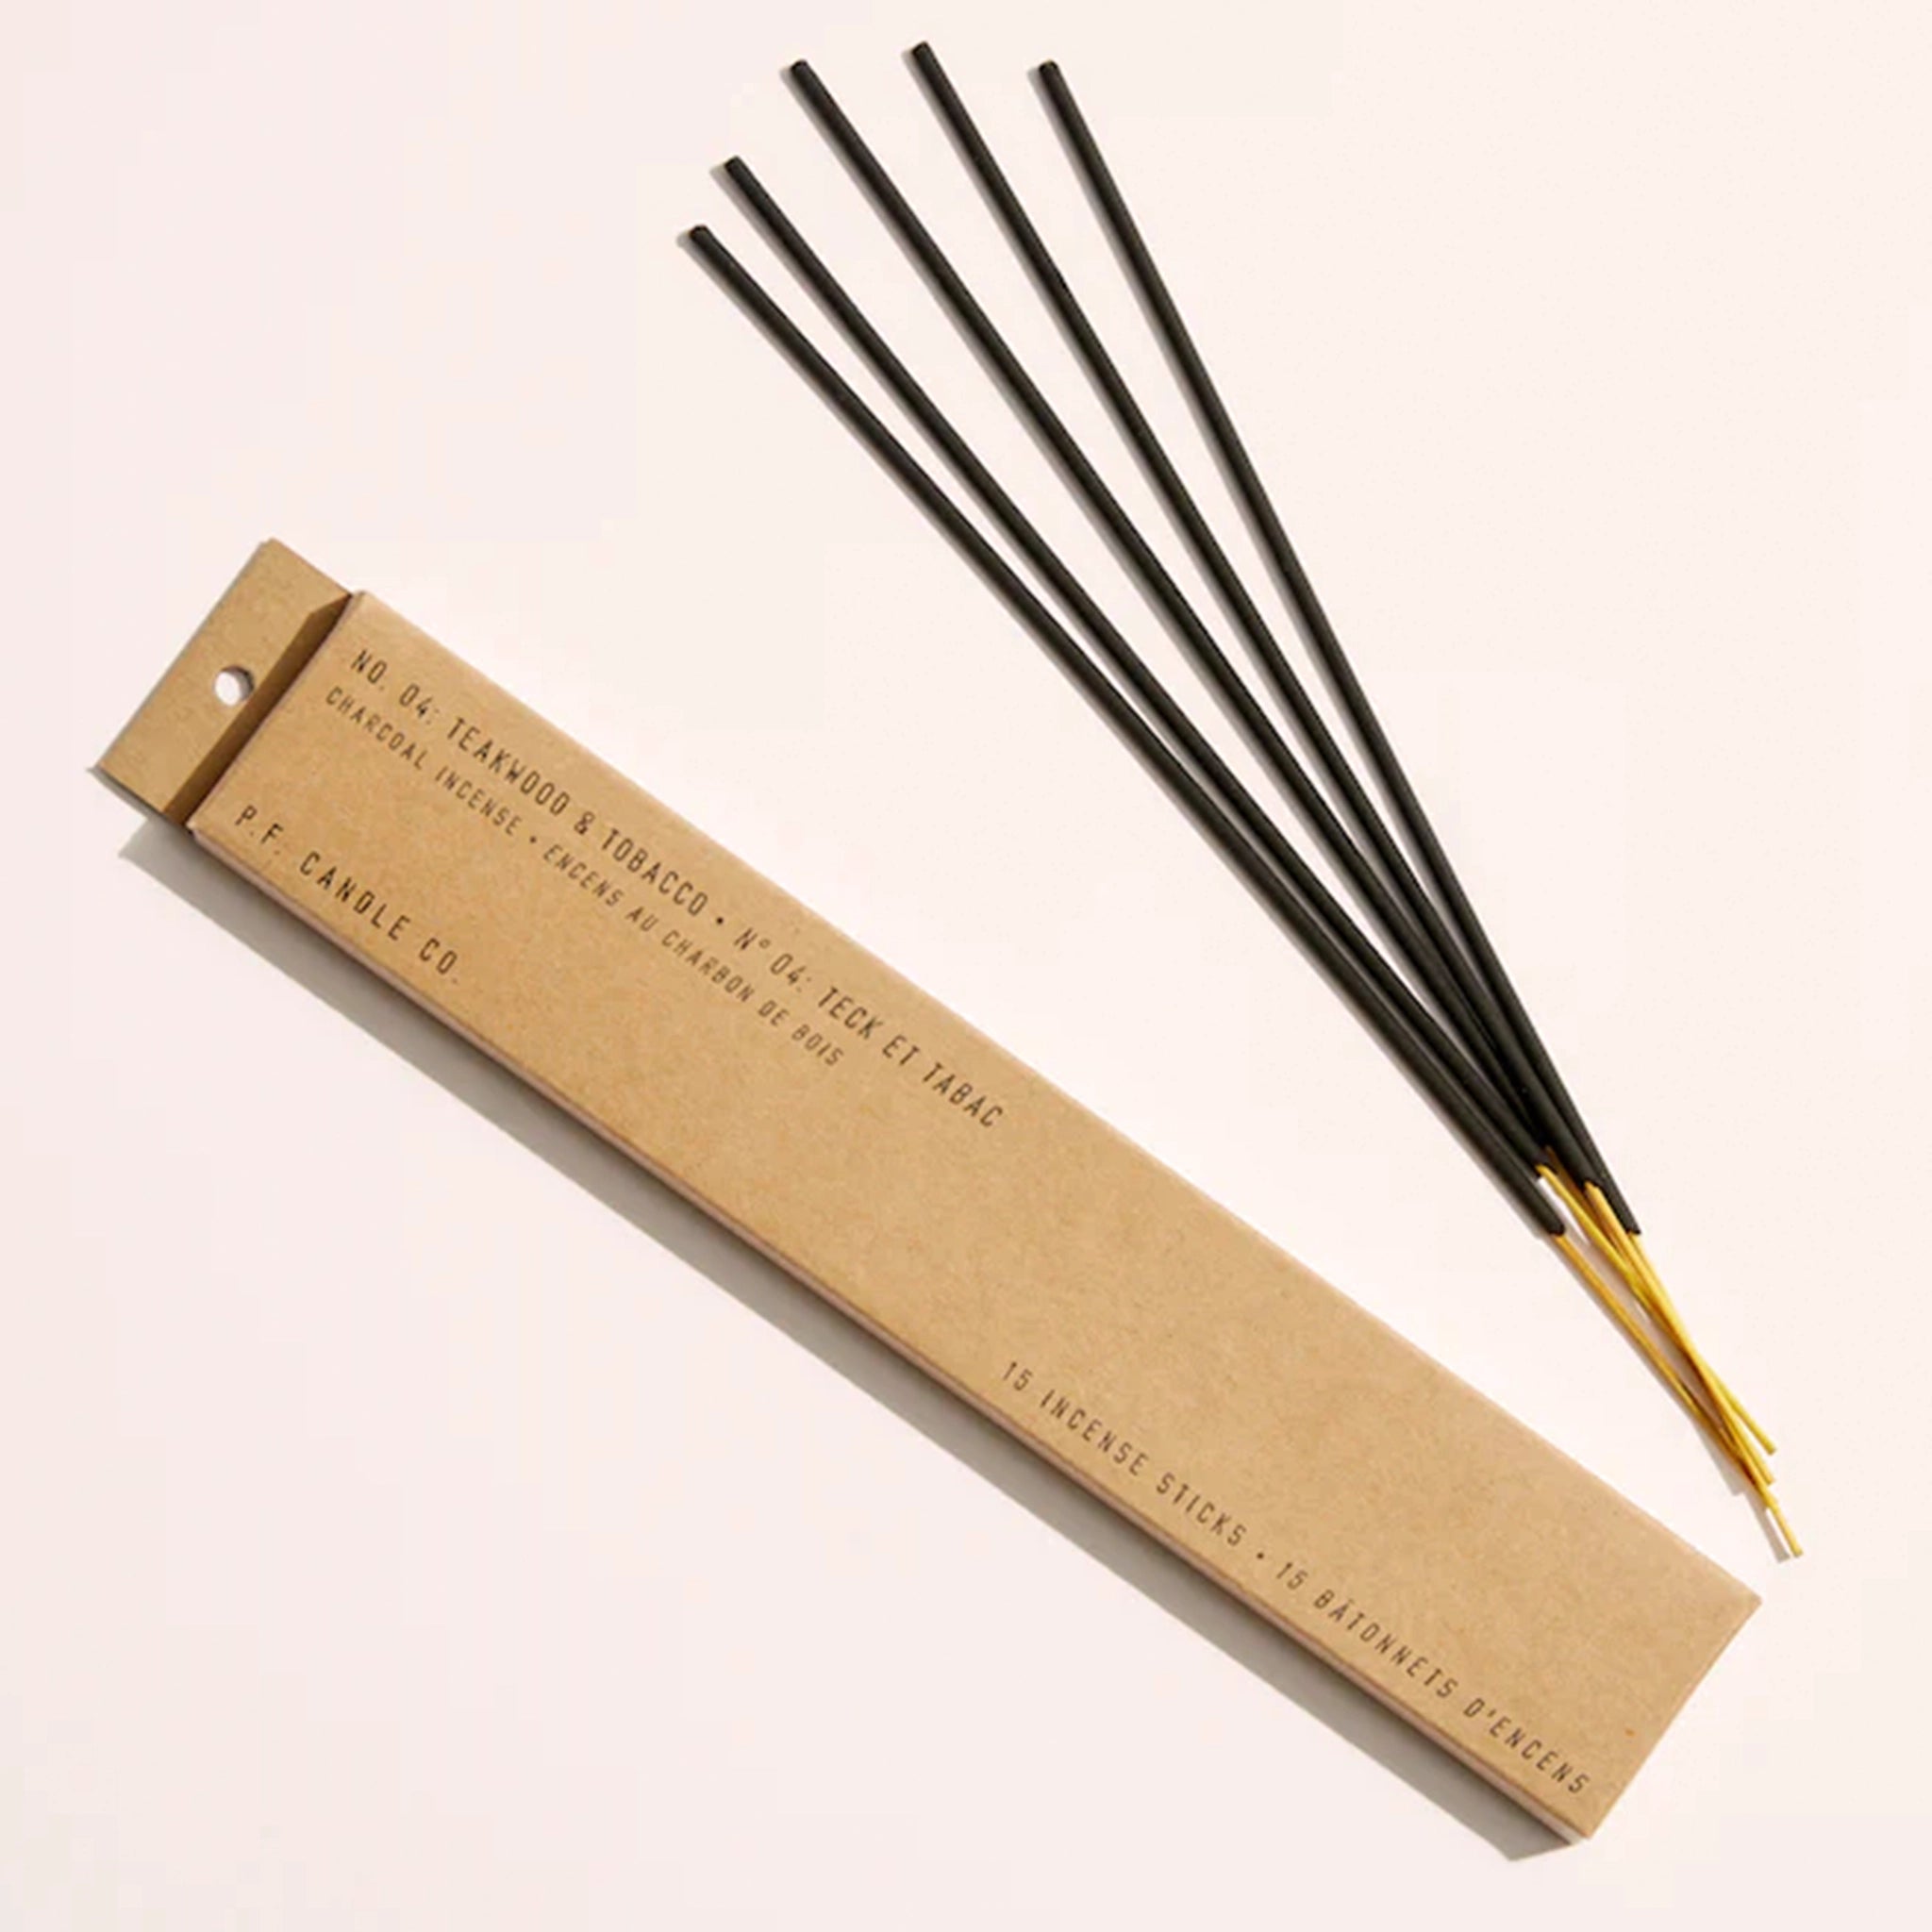 A cardboard package with 5 incense sticks with black ties and exposed natural wood ends along with black text on the box that reads, "Teakwood & Tobacco Incense".